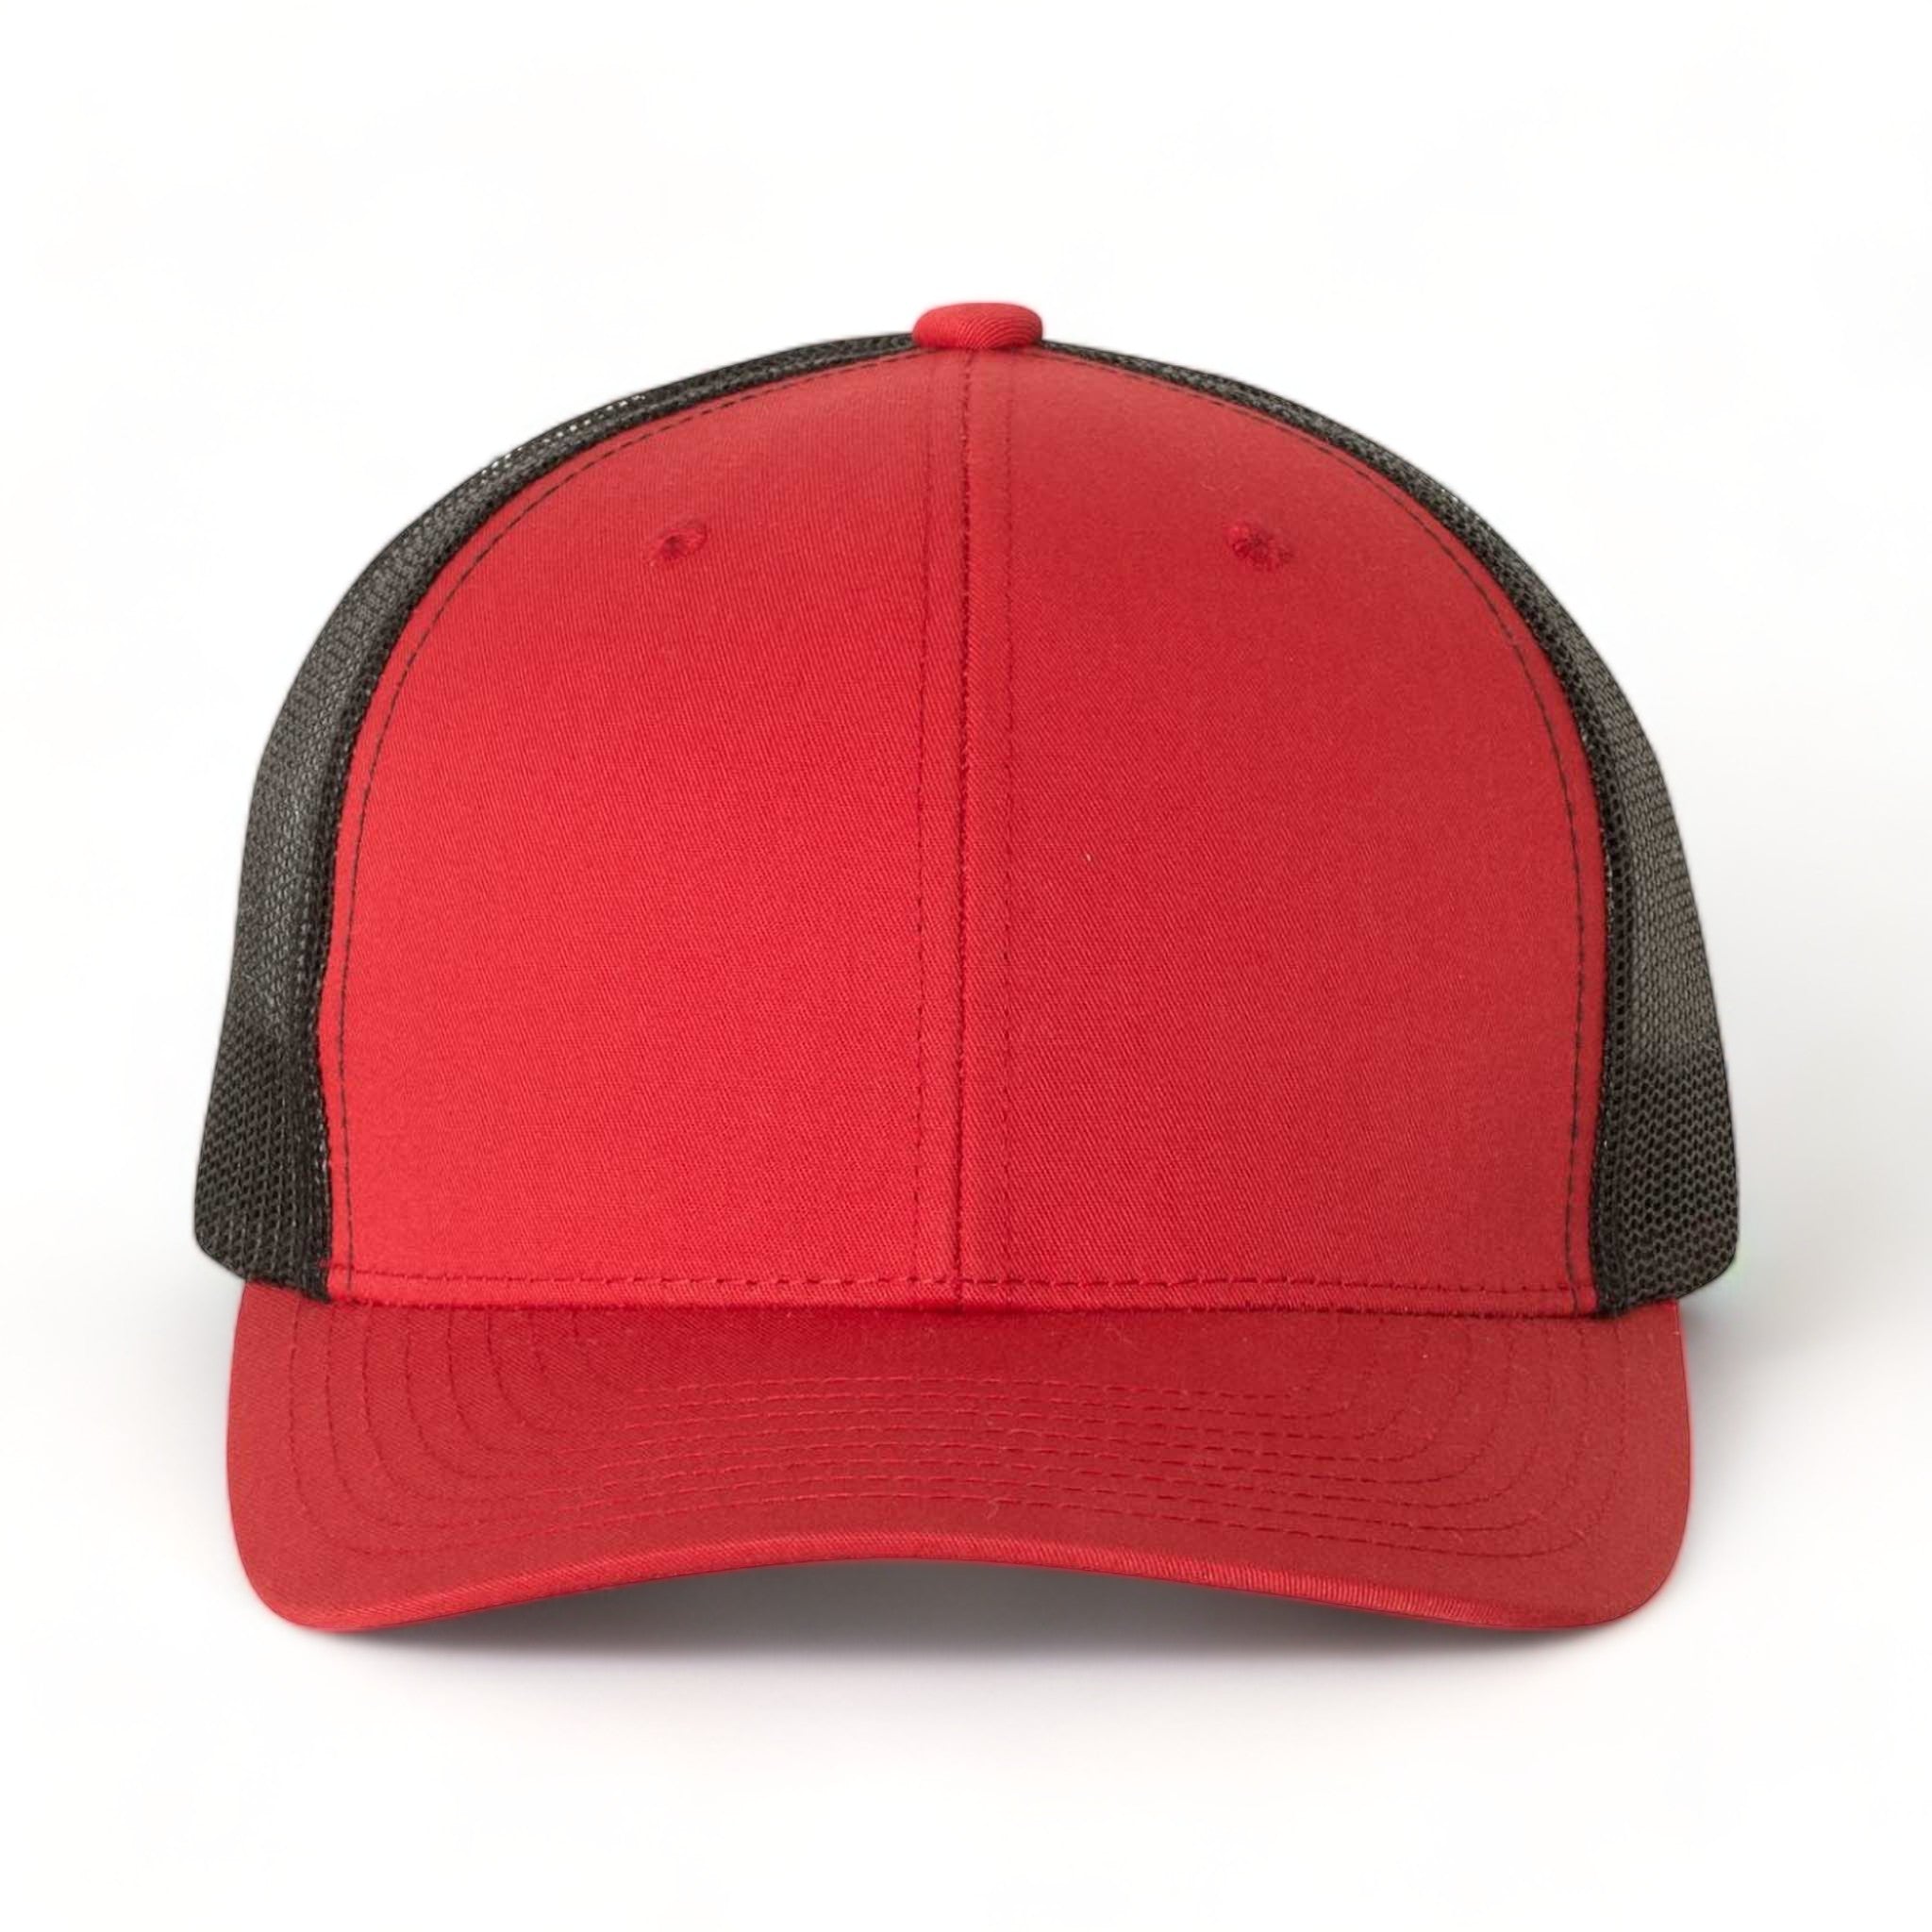 Front view of YP Classics 6606 custom hat in red and black